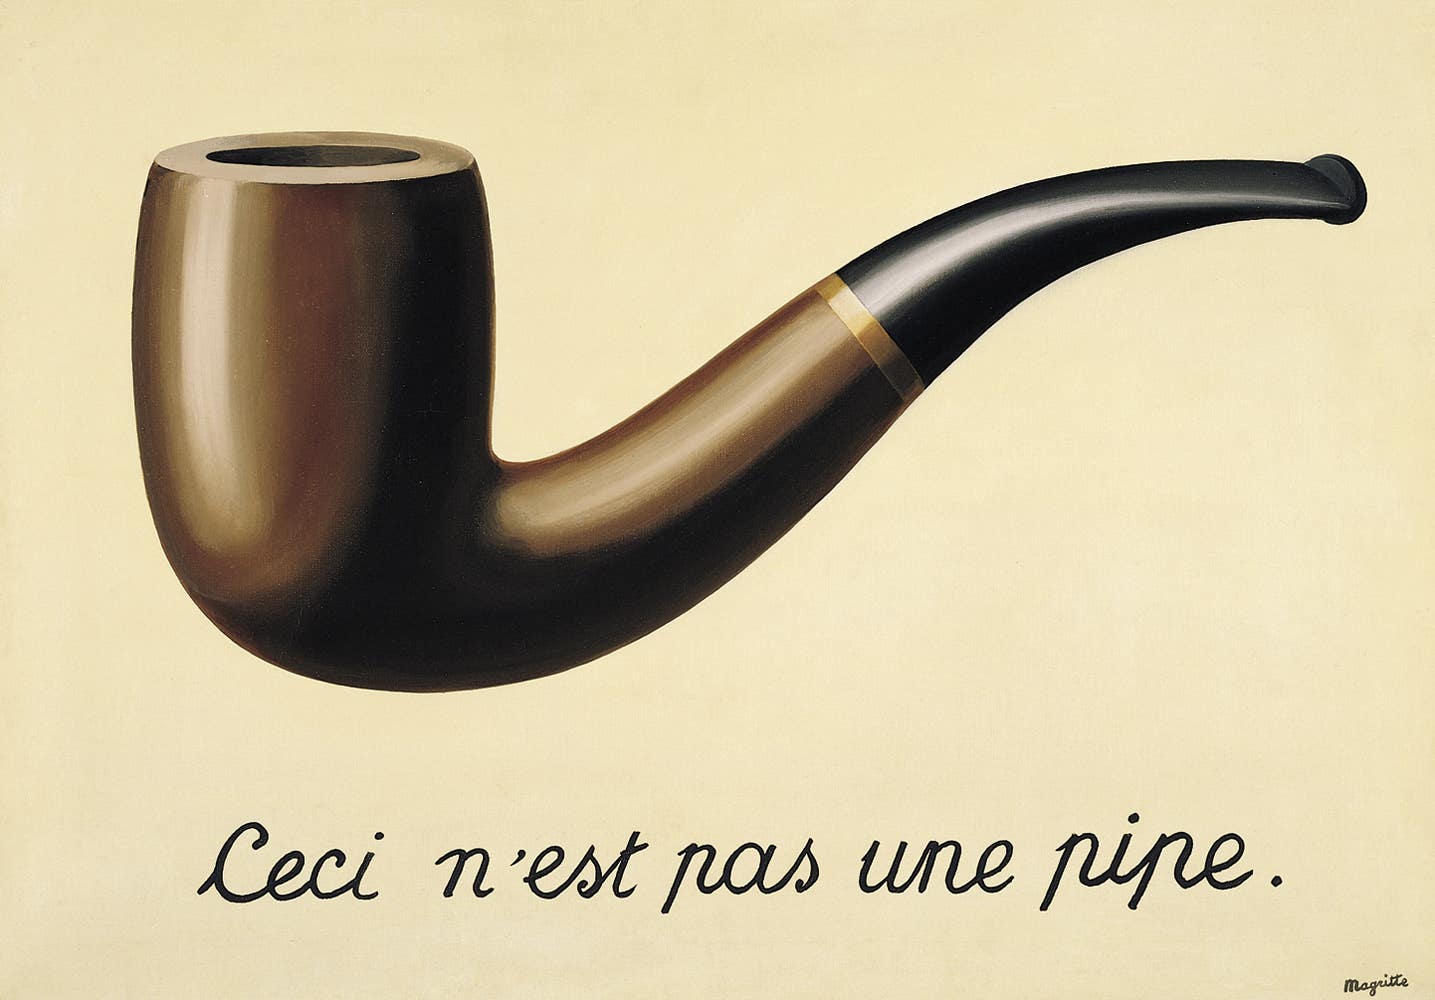 René Magritte - "The Treachery of Images (This is Not a Pipe)"